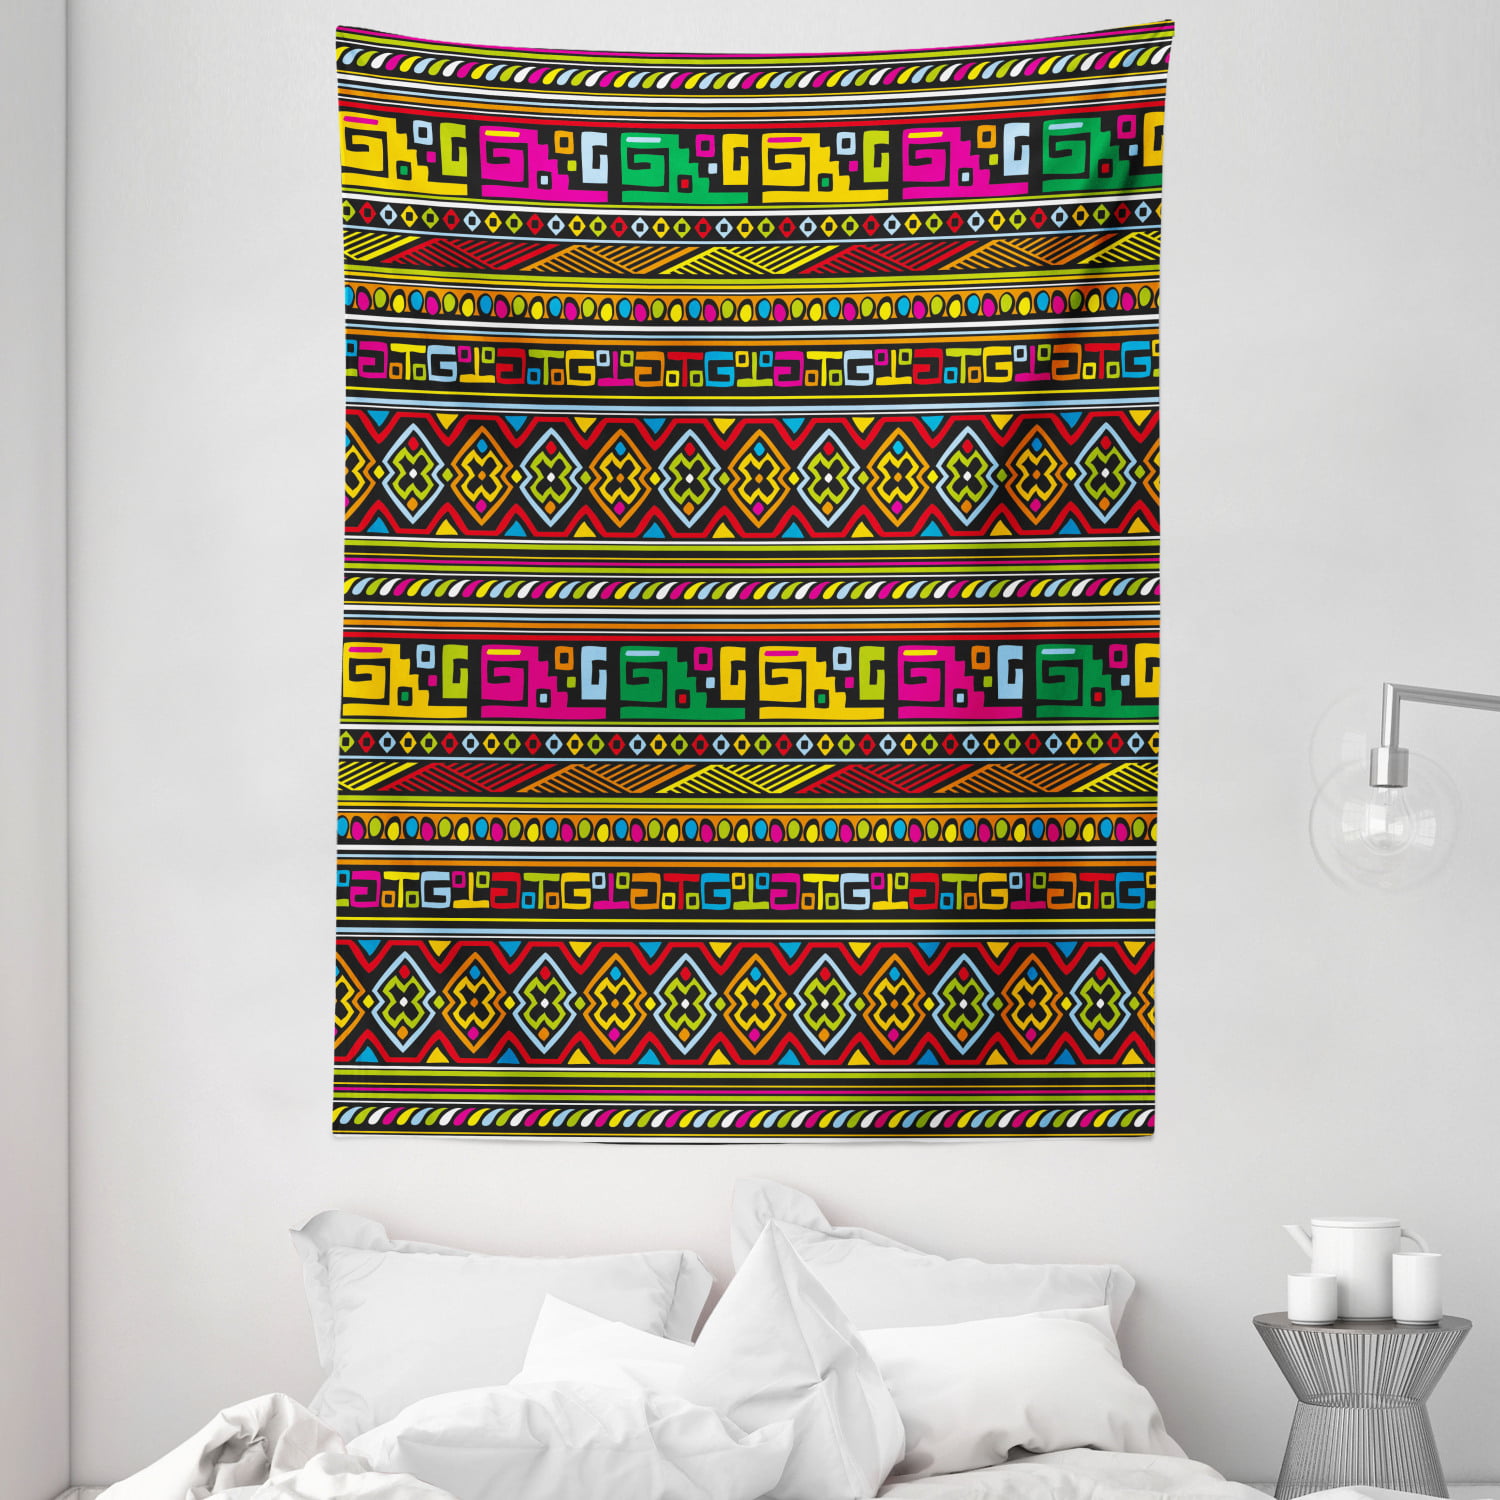 African Tribal Tapestry Wall Hanging Art Bedroom Dorm Room Decor 2 Sizes 